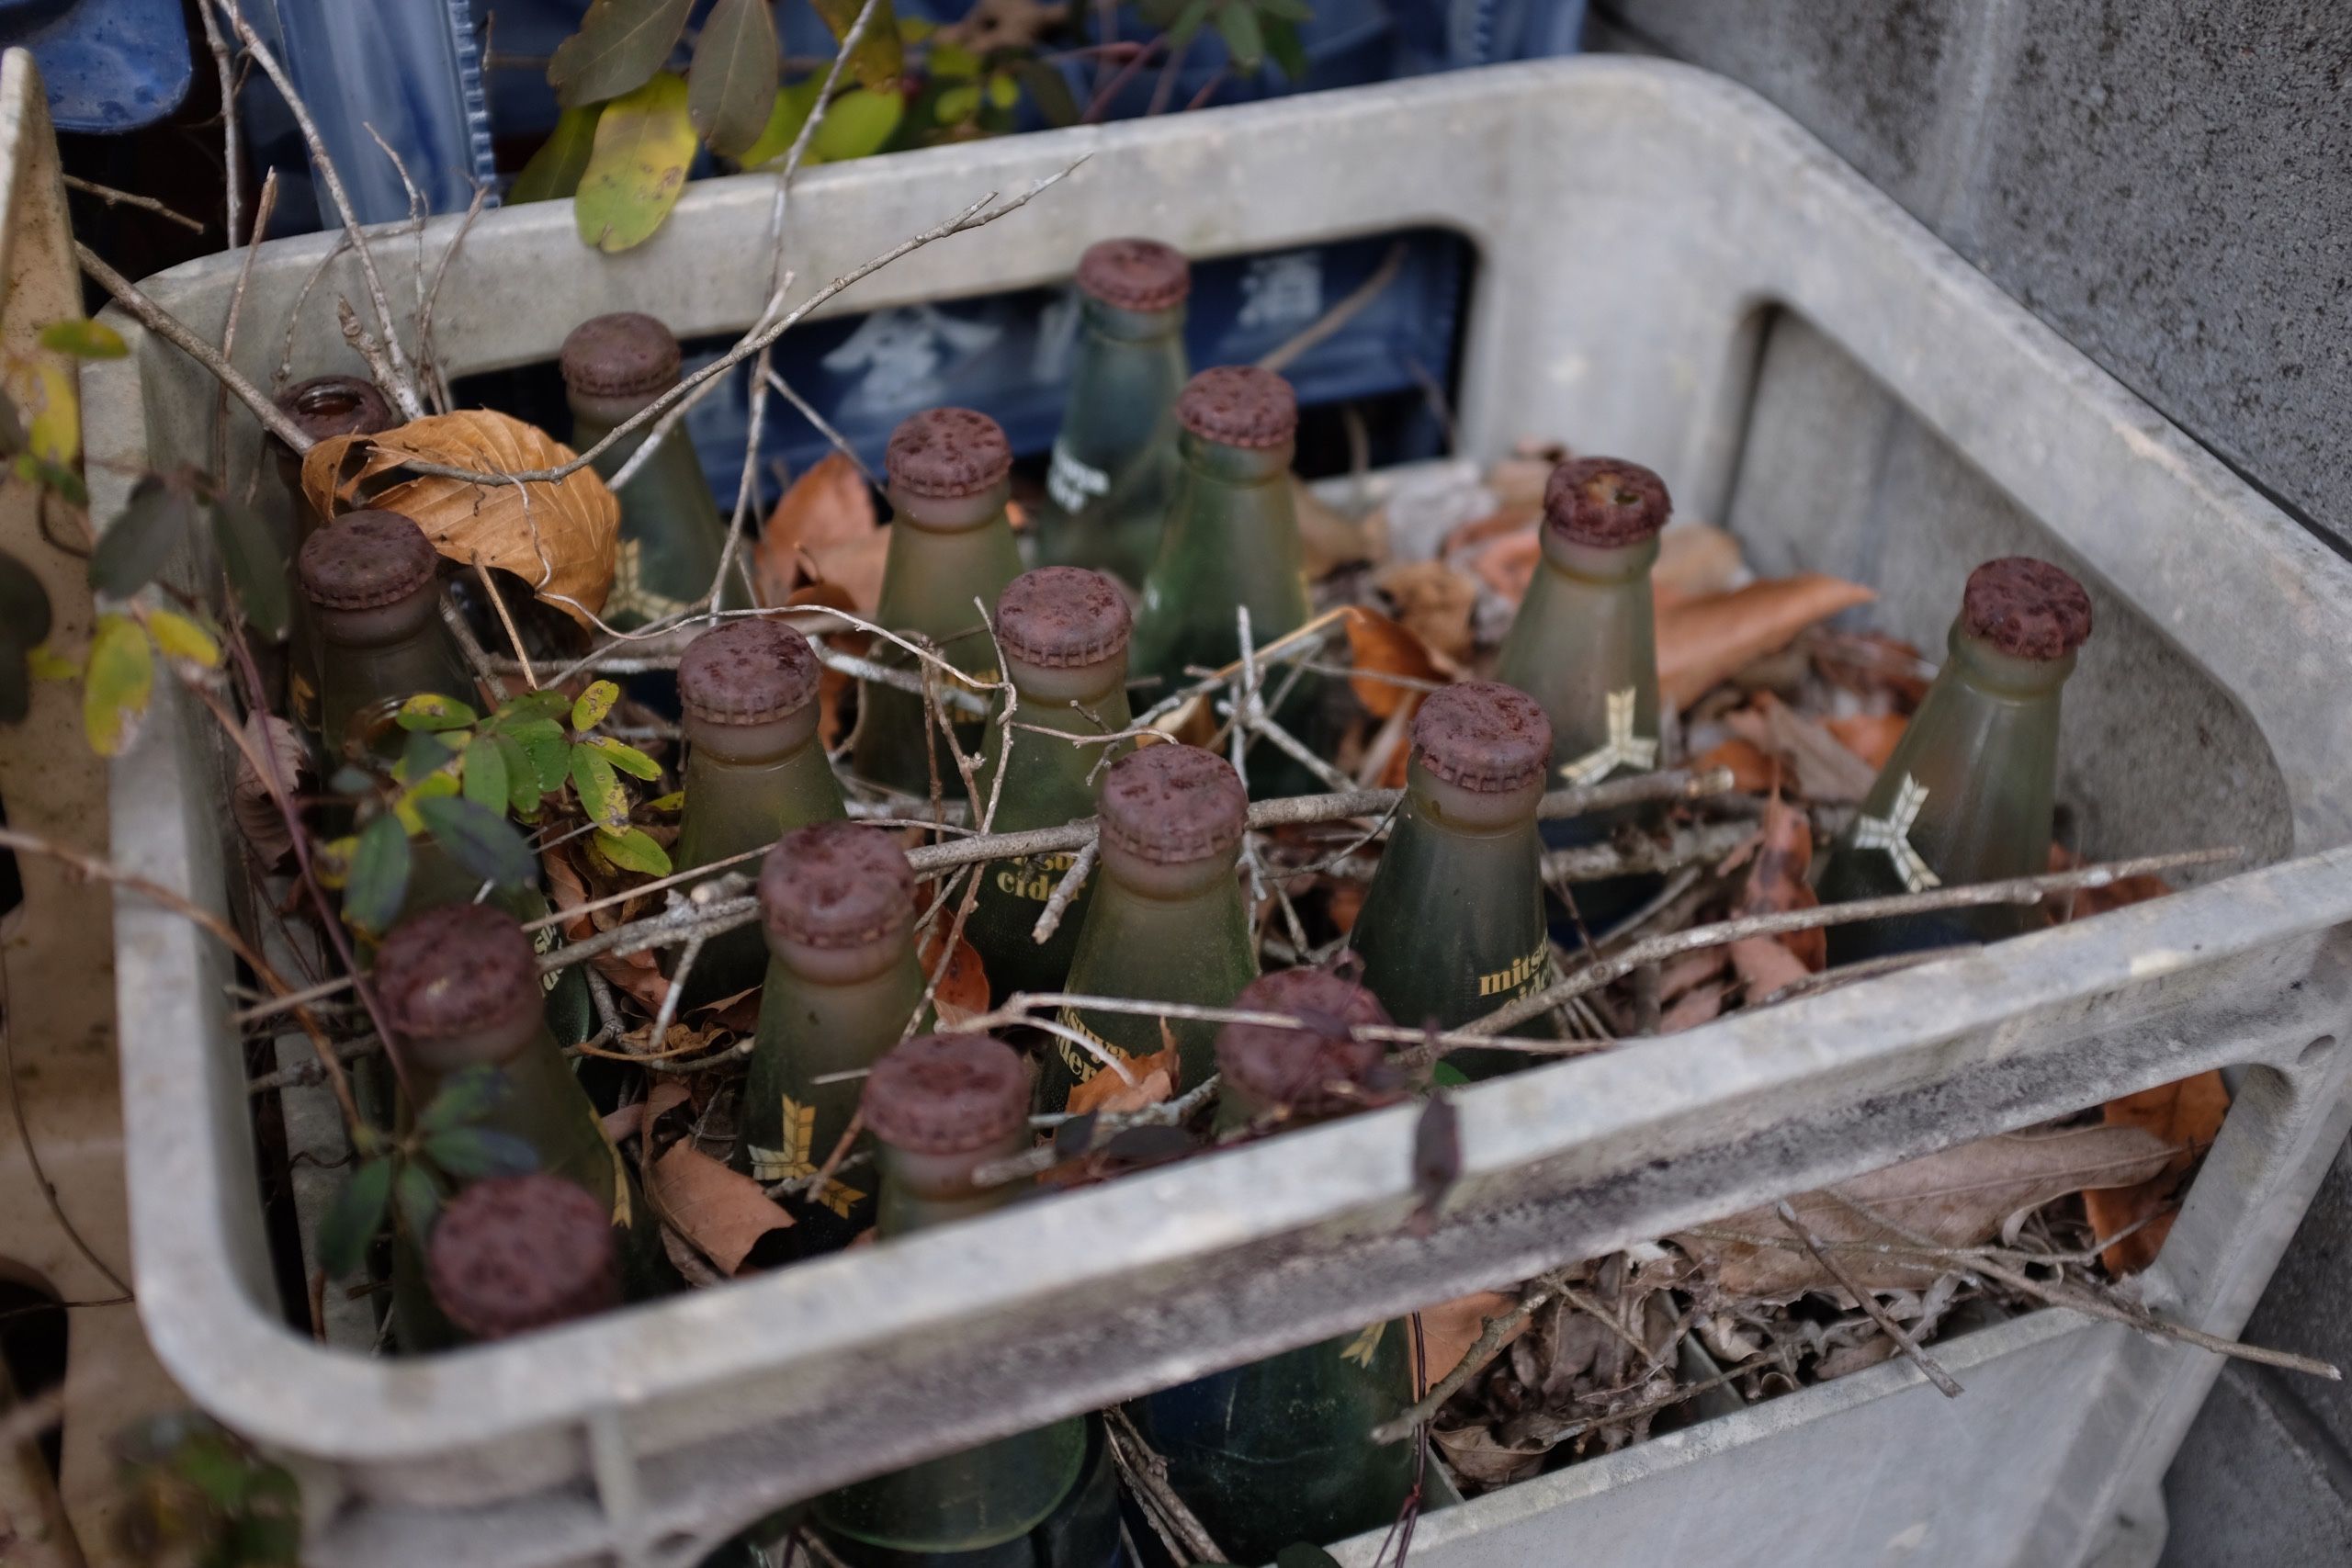 A crate of soft drinks with bottle caps rusted through and covered in twigs.